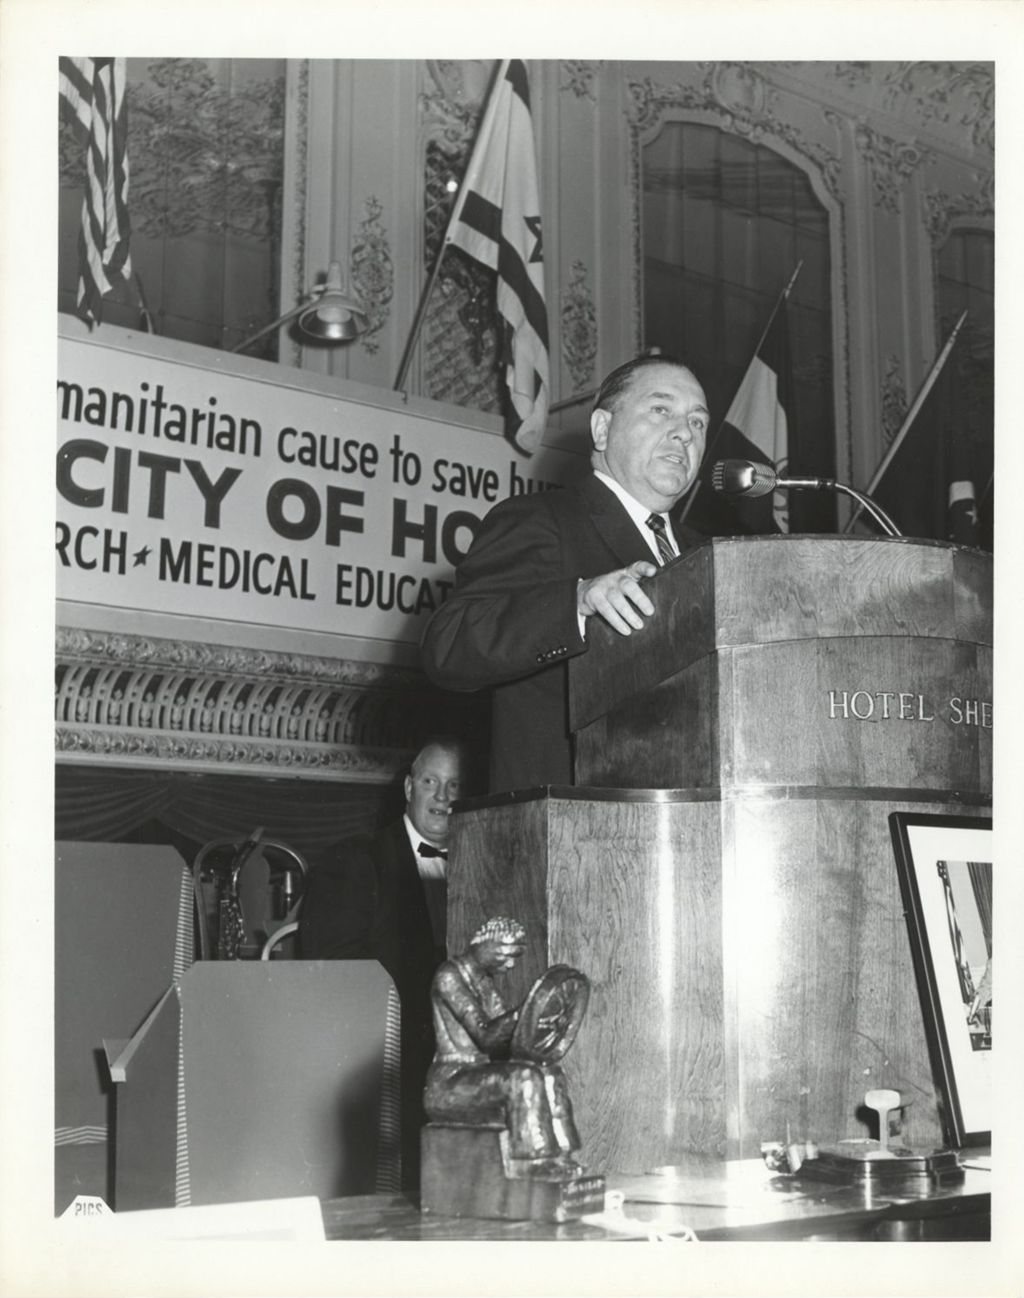 Richard J. Daley speaking at City of Hope event